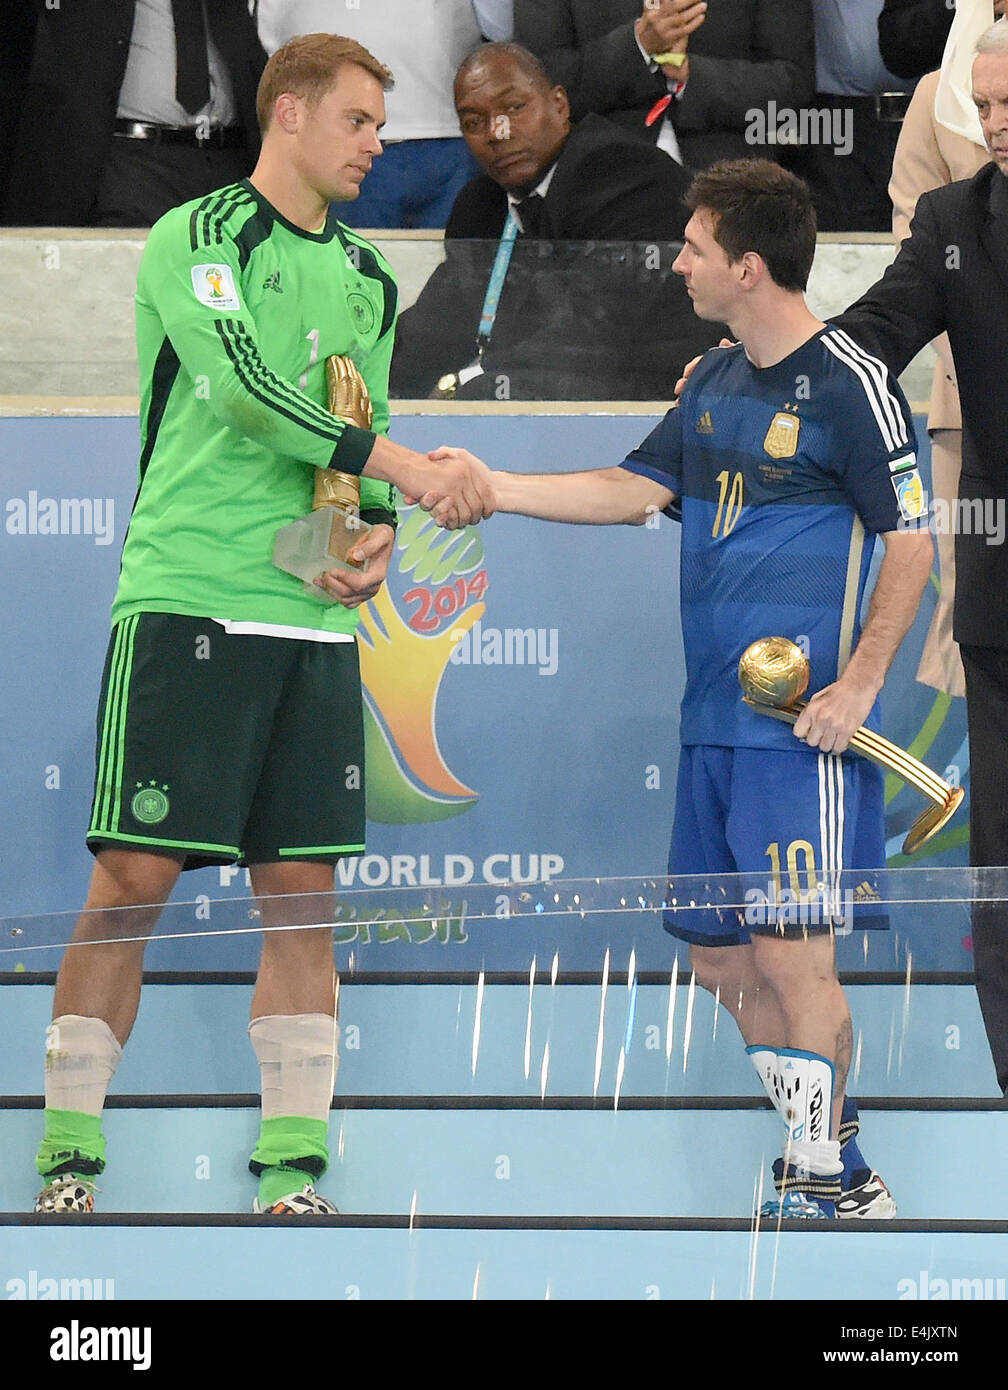 Rio de Janeiro, Brazil. 13th July, 2014. Goalkeeper Manuel Neuer of Germany (L) and Lionel Messi of Argentina shakes hand after being awarded as best goalkeeper with the golden glove and the best player with the golden ball after the FIFA World Cup 2014 final between Germany and Argentina at the Estadio do Maracana in Rio de Janeiro, Brazil, 13 July 2014. Photo: Marcus Brandt/dpa/Alamy Live News Stock Photo